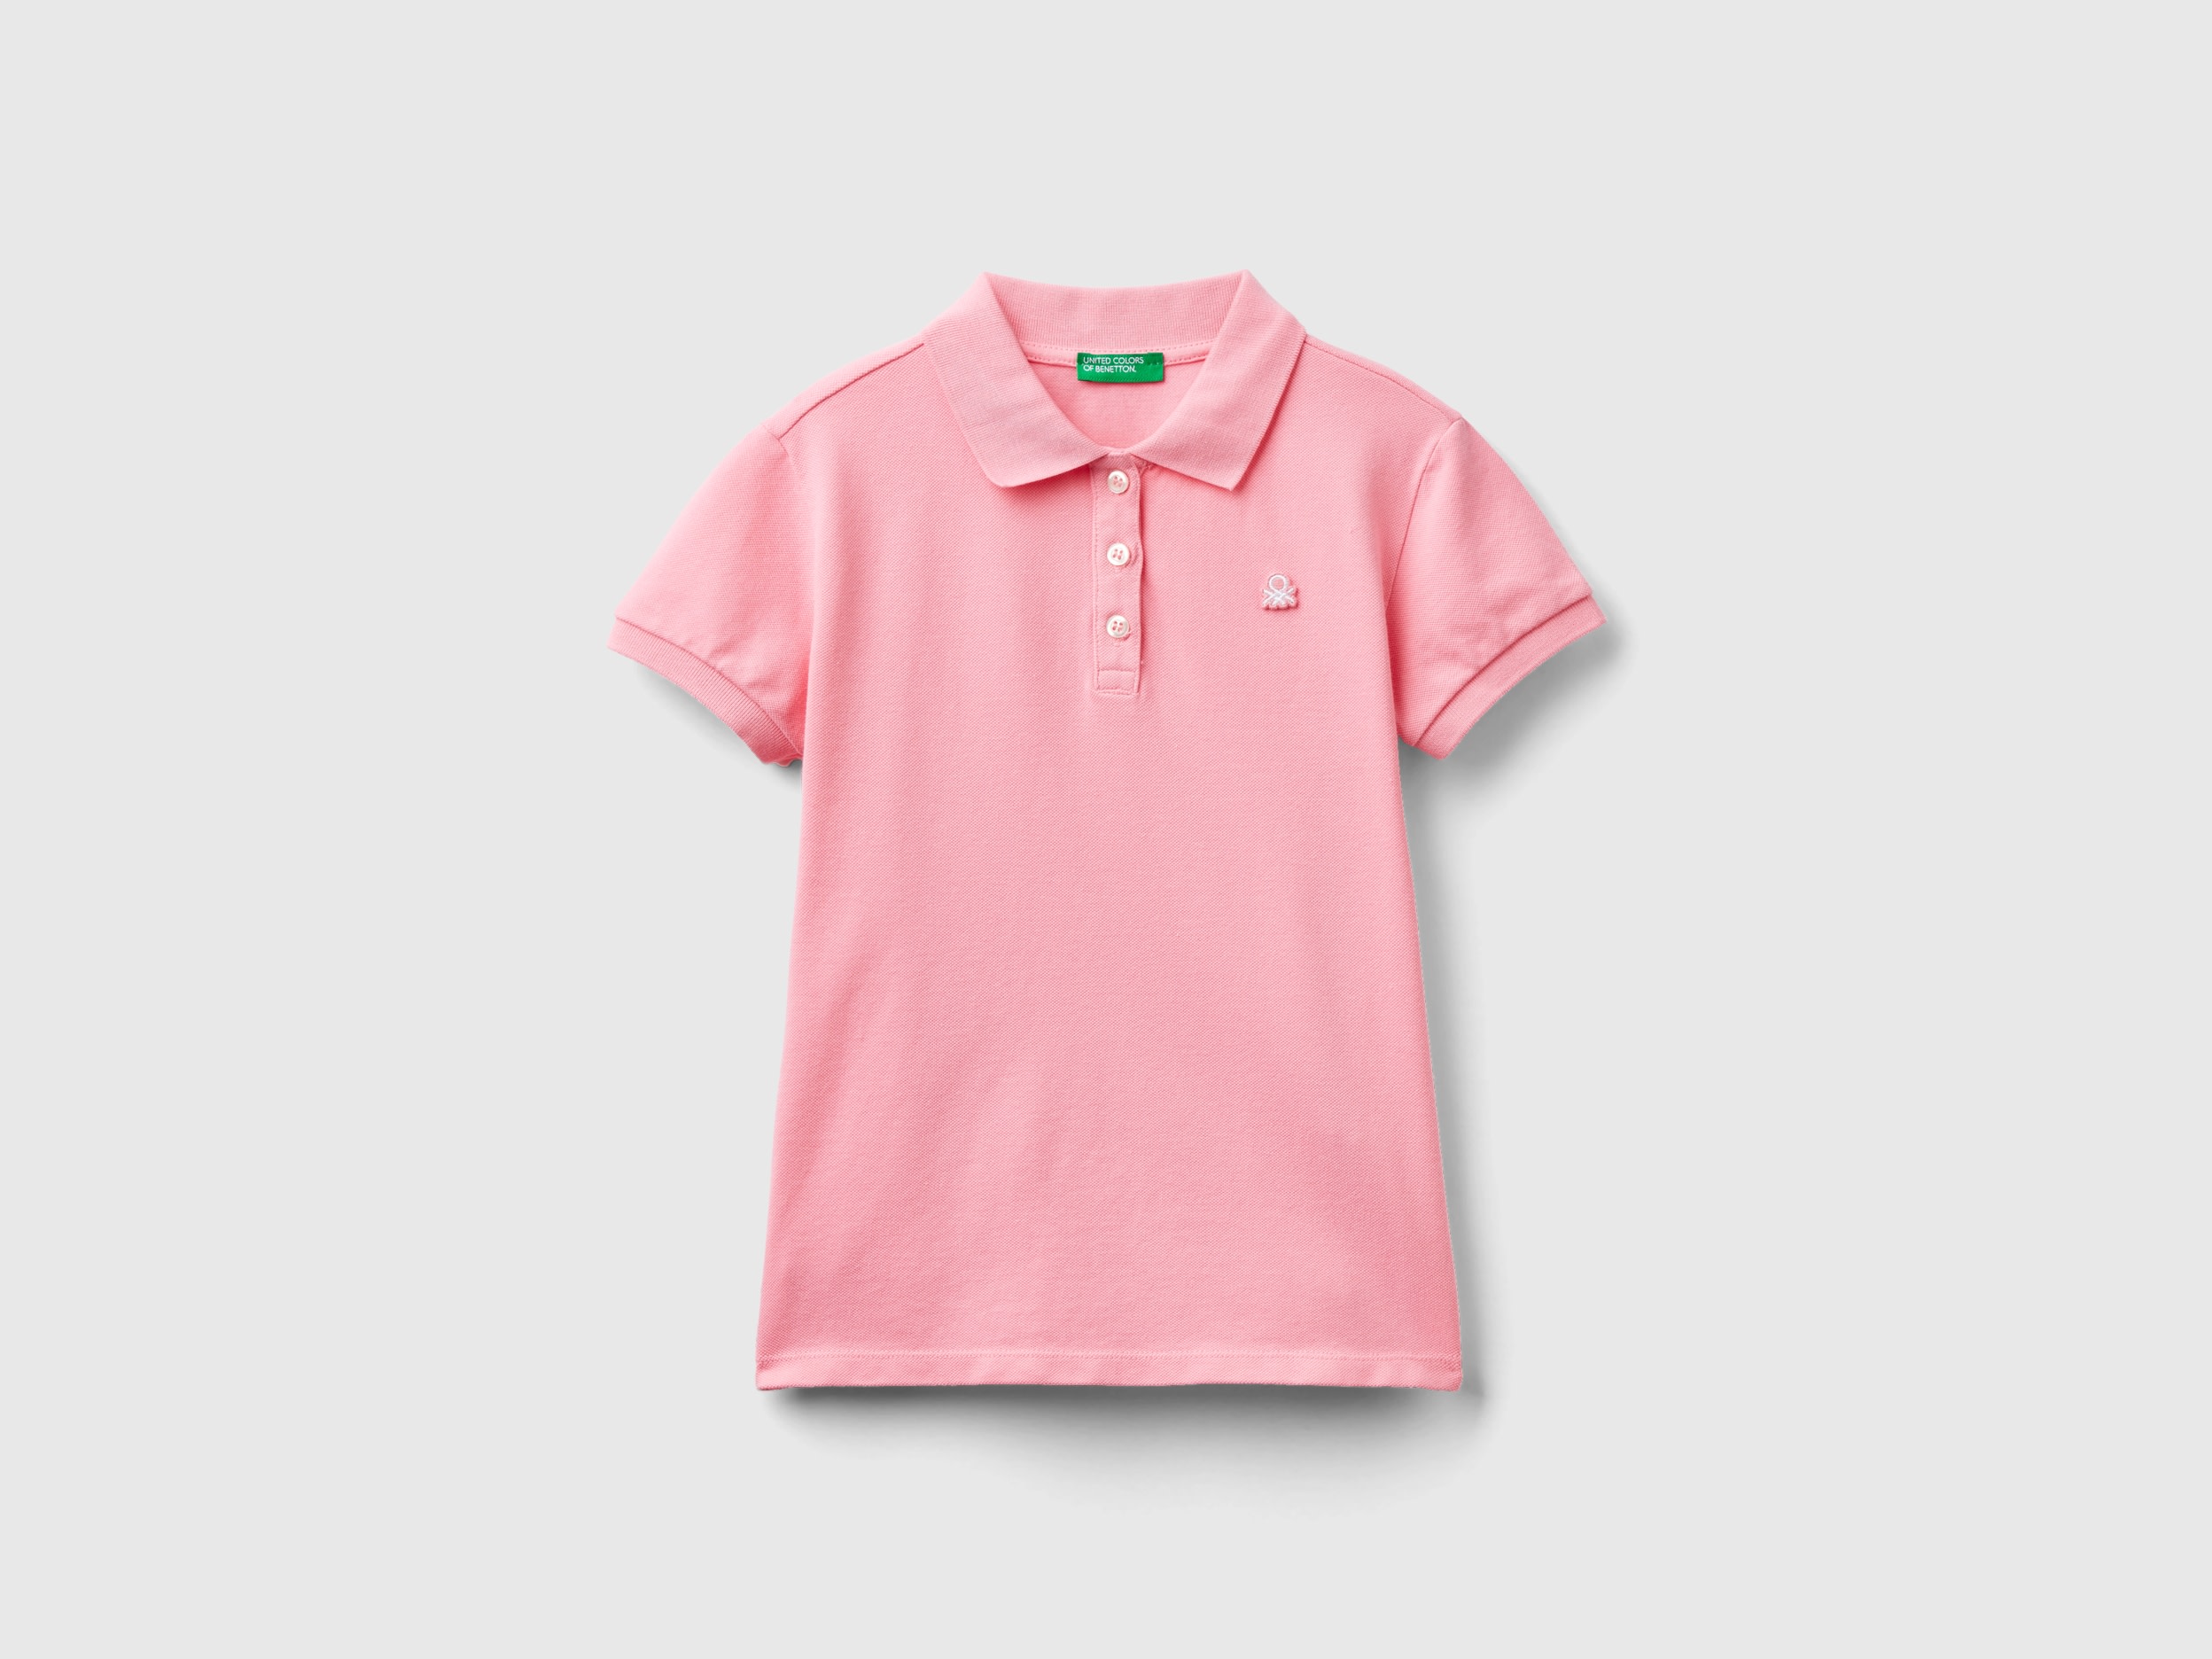 Image of Benetton, Short Sleeve Polo In Organic Cotton, size 2XL, Pink, Kids